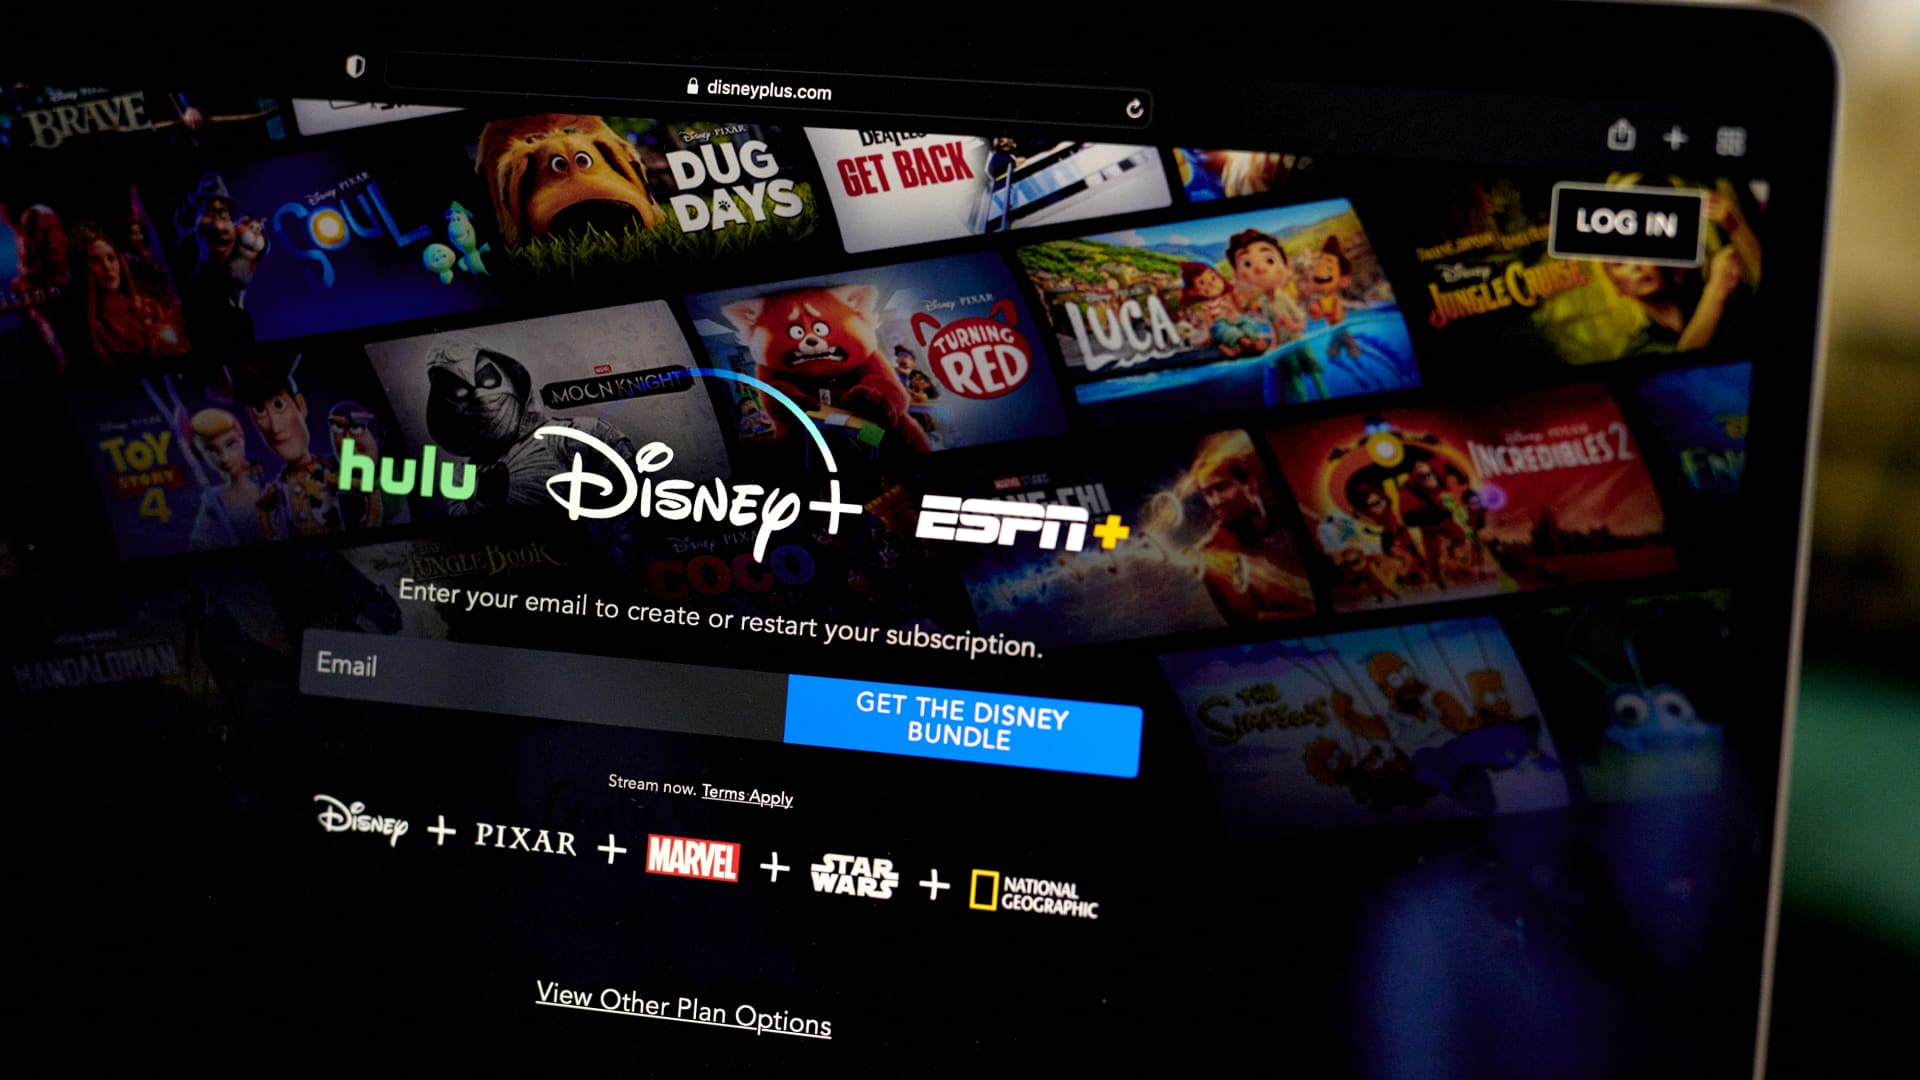 Streaming bundles are forming, but don't expect a cable TV-like package any time soon